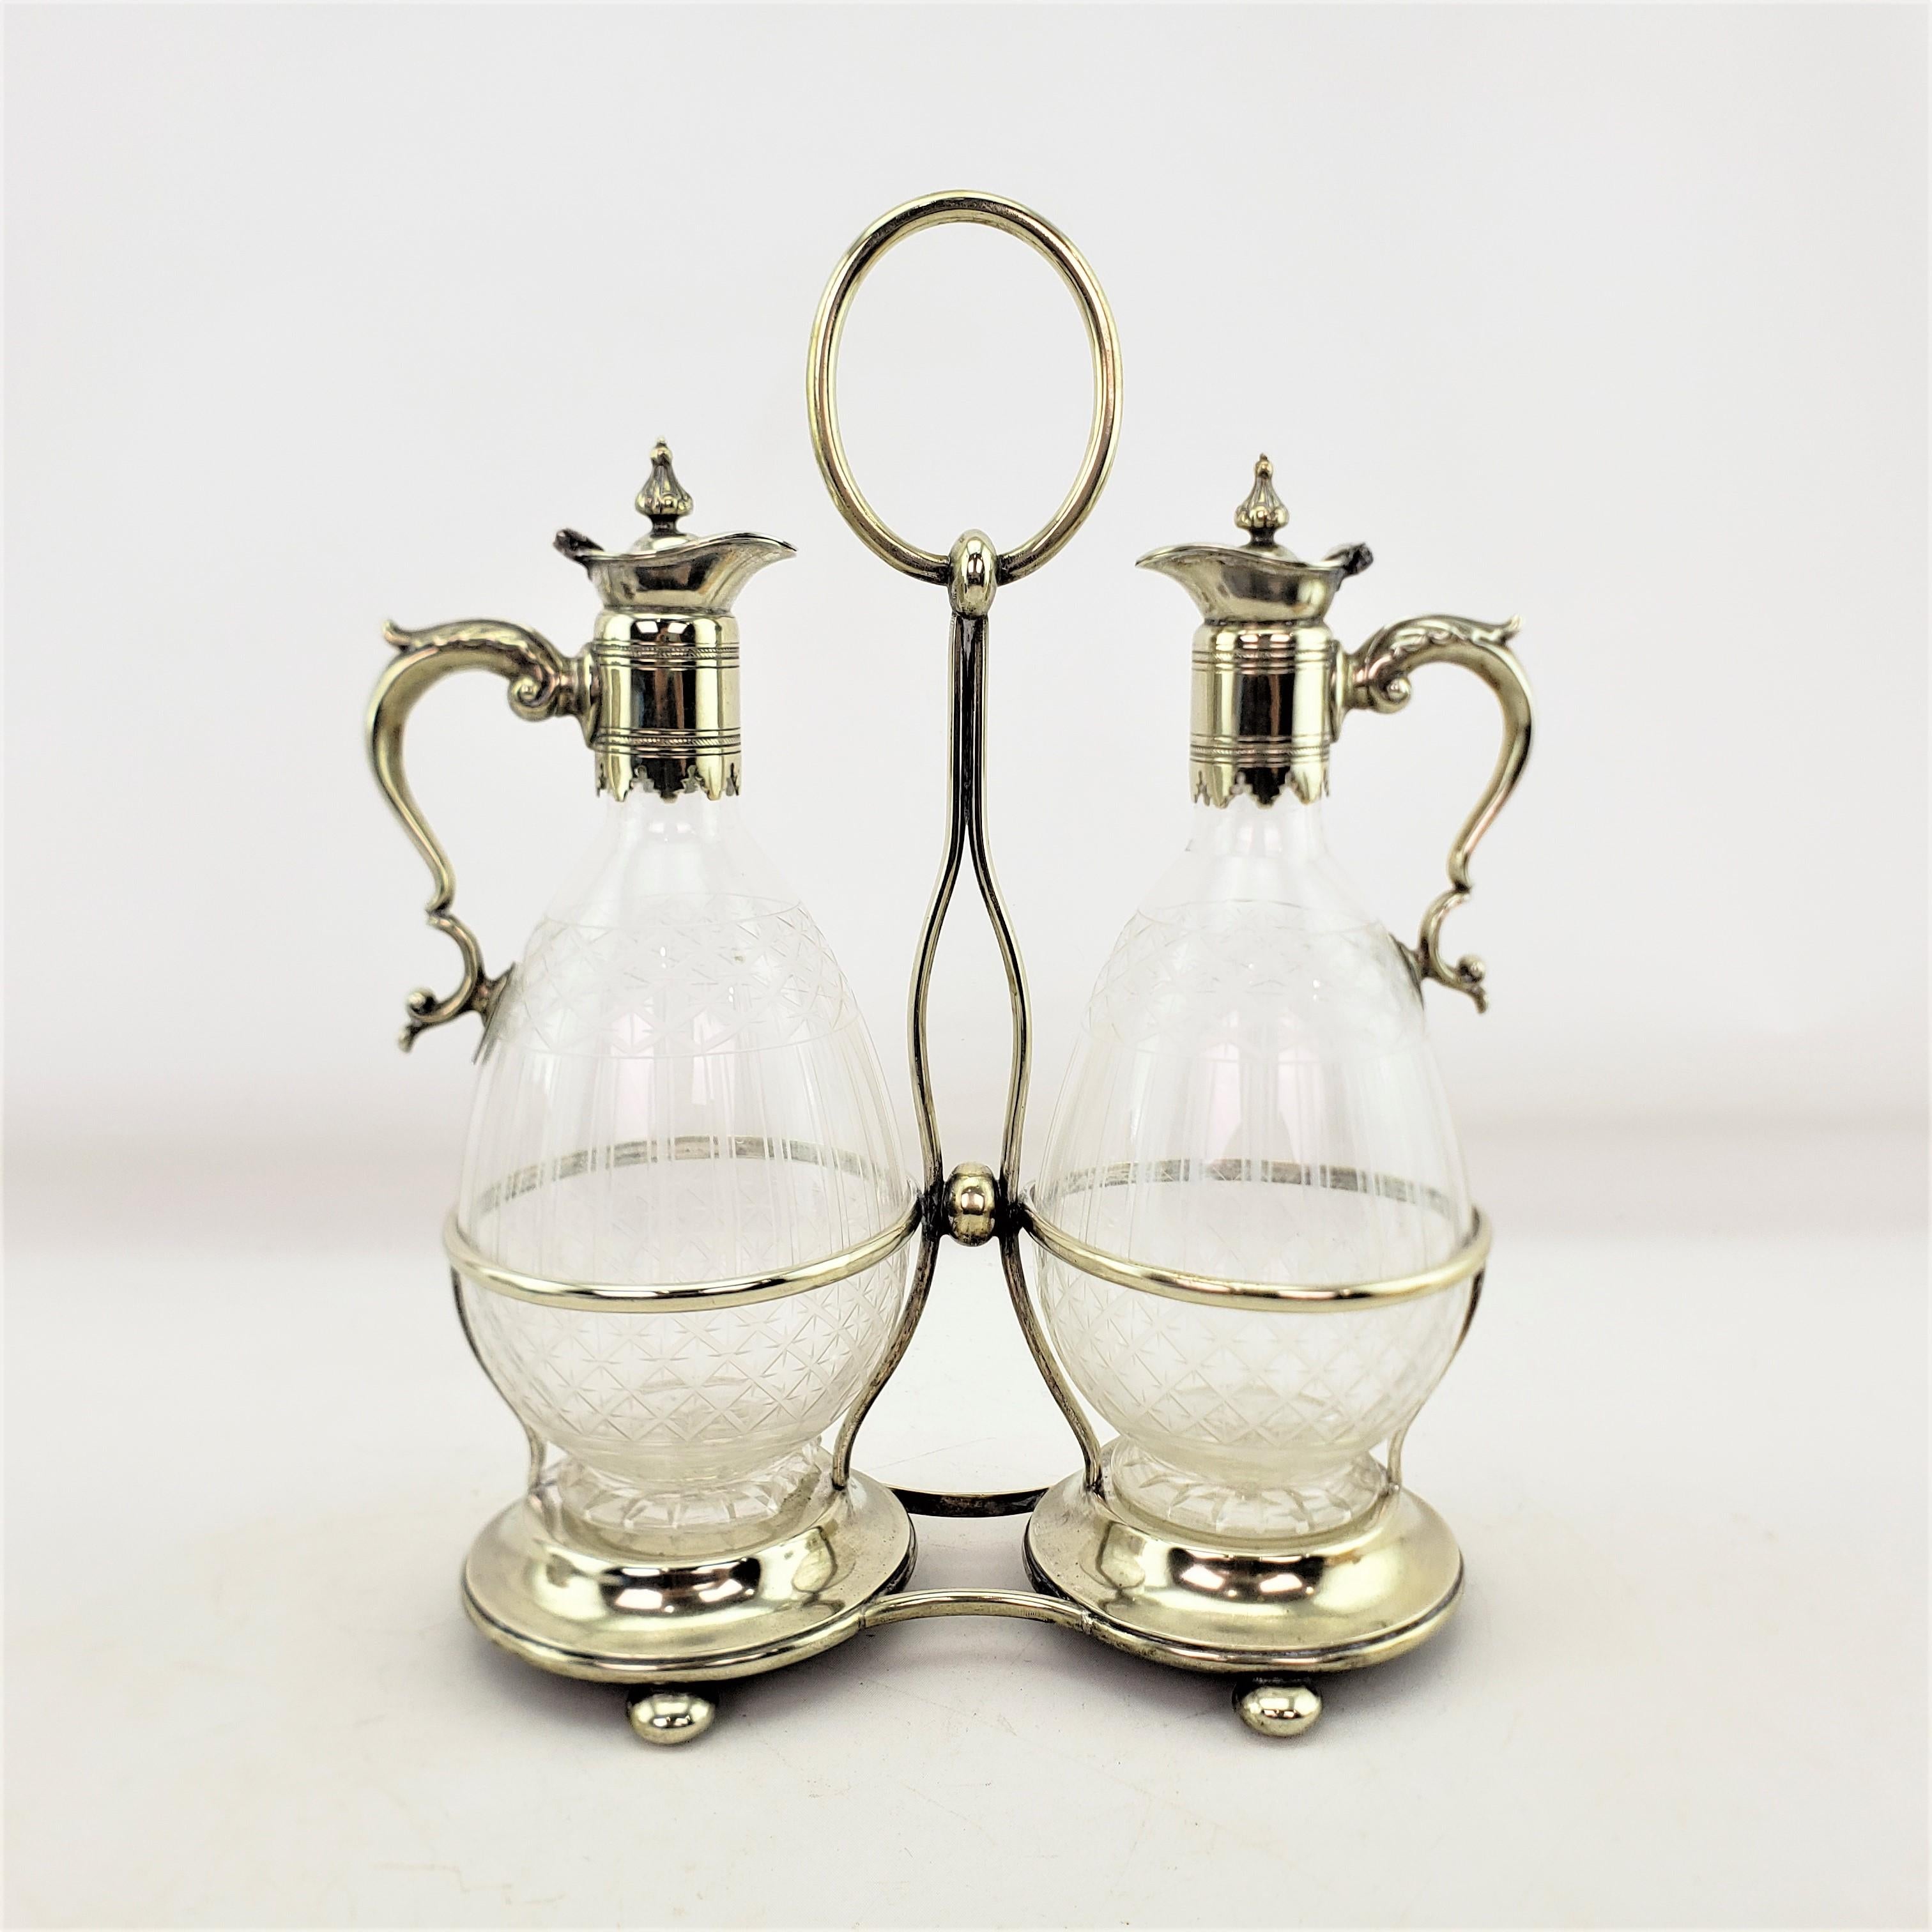 Edwardian Antique Pair of Silver Plated & Etched Glass Claret Jugs, or Sherry Decanters For Sale